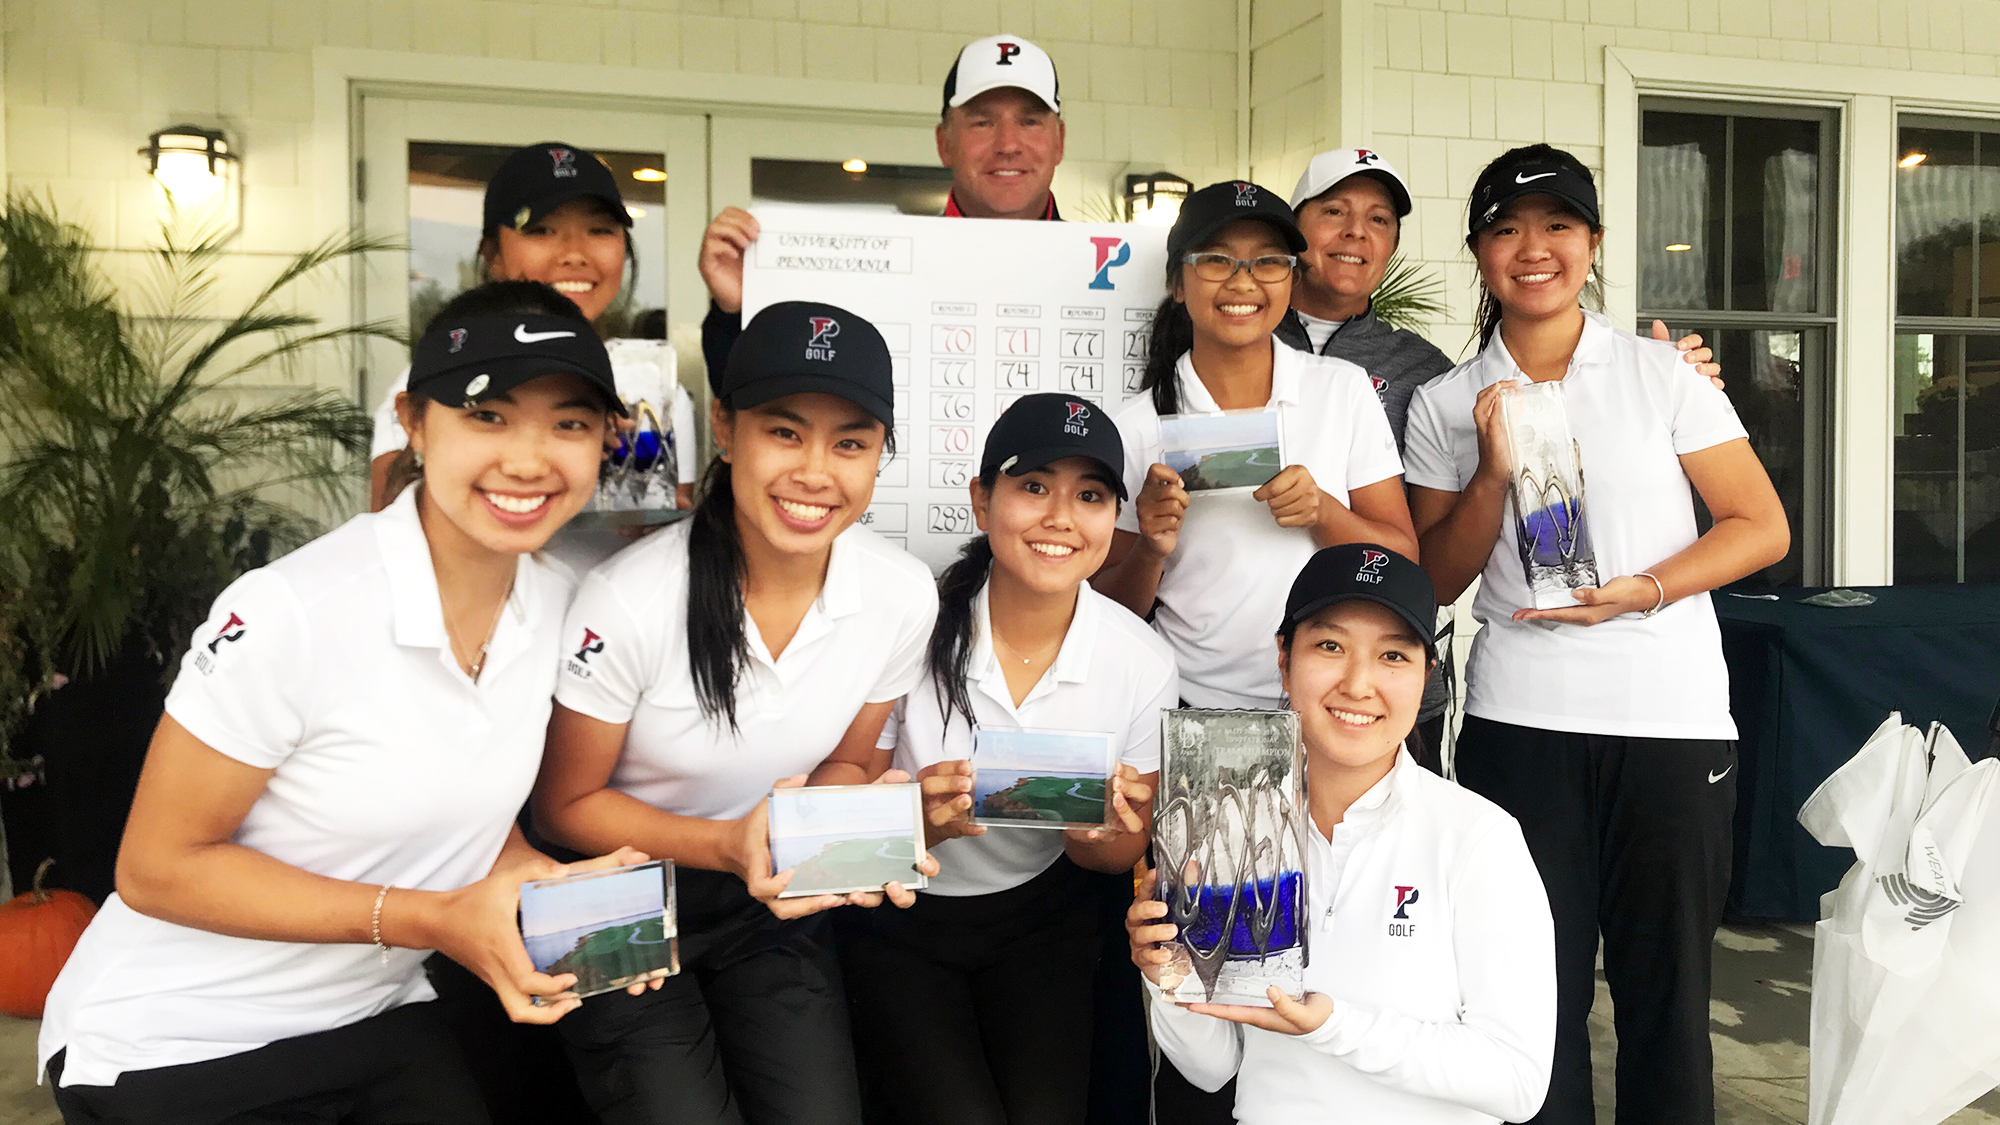 Members of the women's golf team hold their trophies from the Lady Blue Hen Invitational.